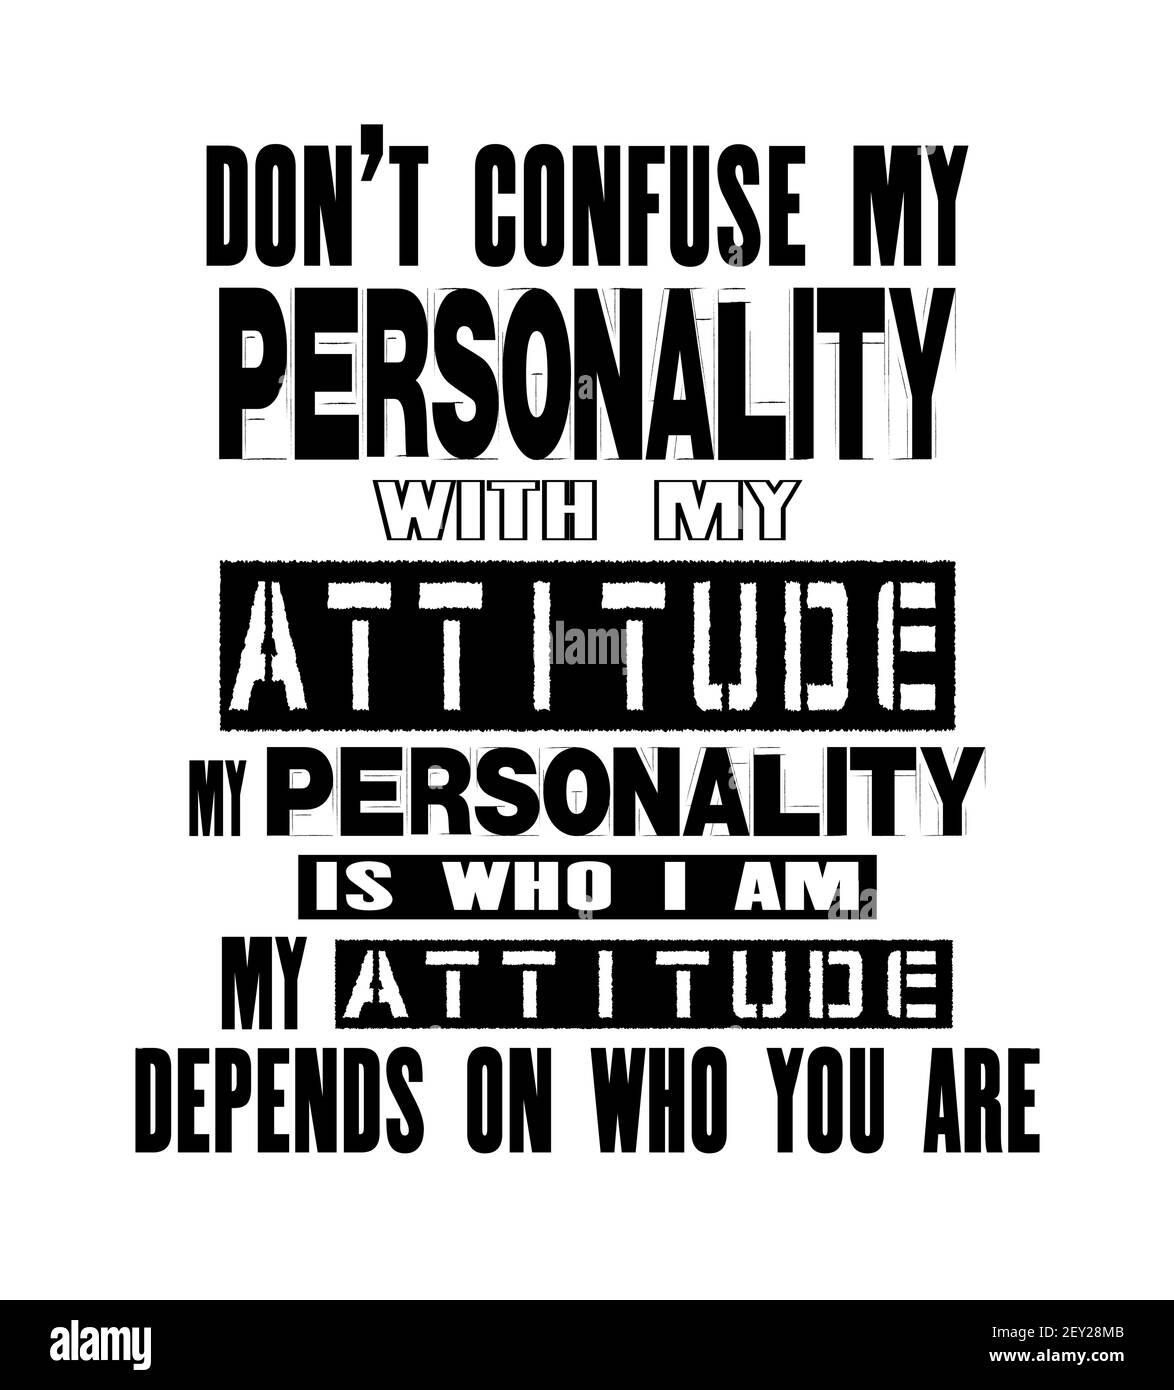 Inspiring motivation quote with text Do Not Confuse My Personality With My Attitude My Personality Is Who I Am My Attitude Depends On Who You Are. Vec Stock Vector